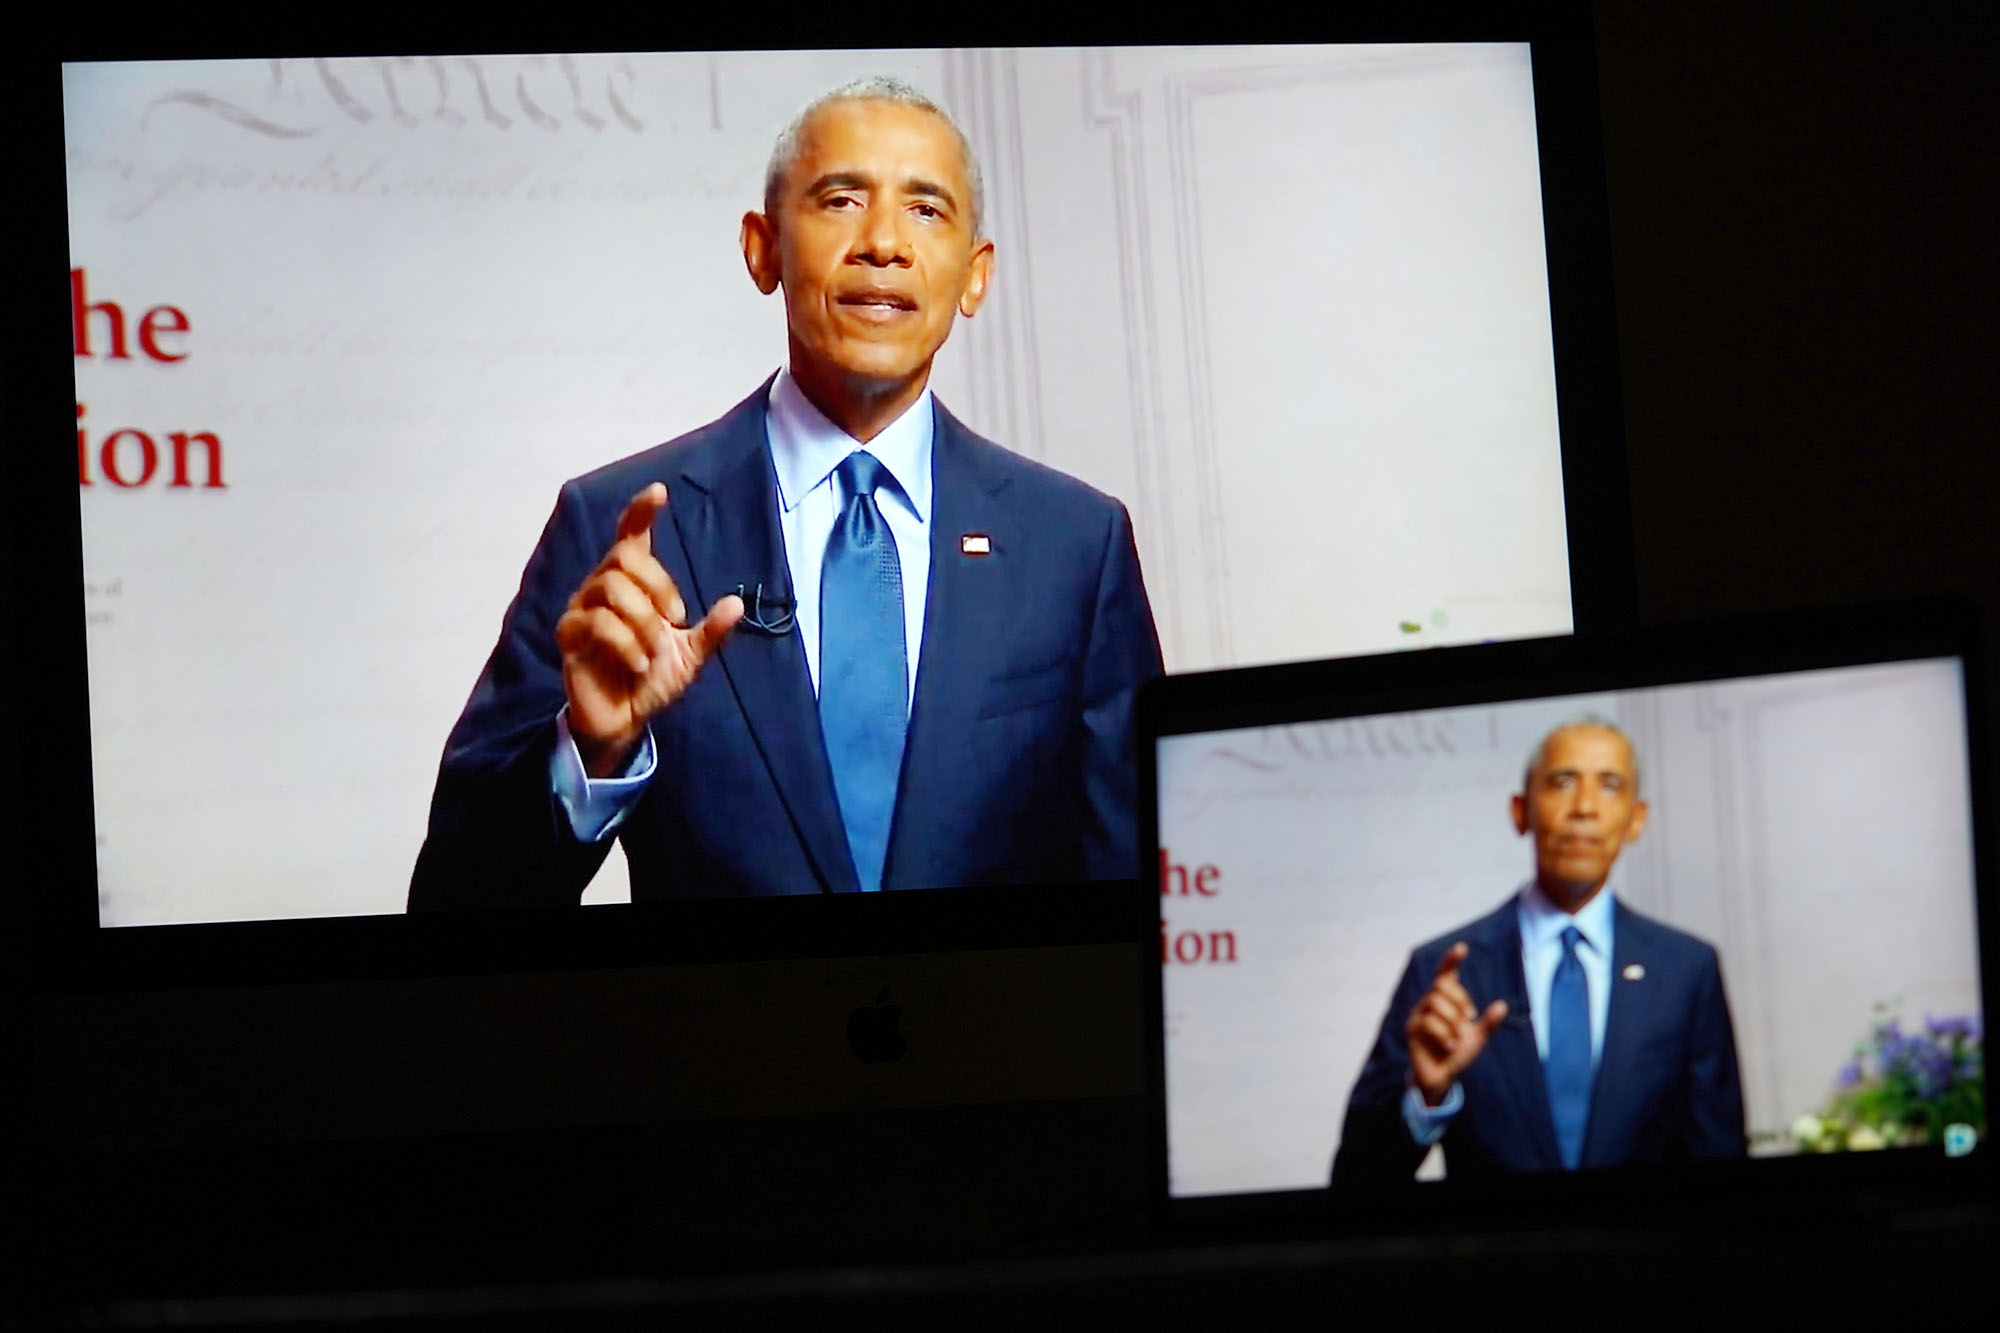 PHOTO: Images of former President Barack Obama speaking in a video feed of the 2020 Democratic National Convention are displayed on screens in Arlington, Va., Aug. 19, 2020.